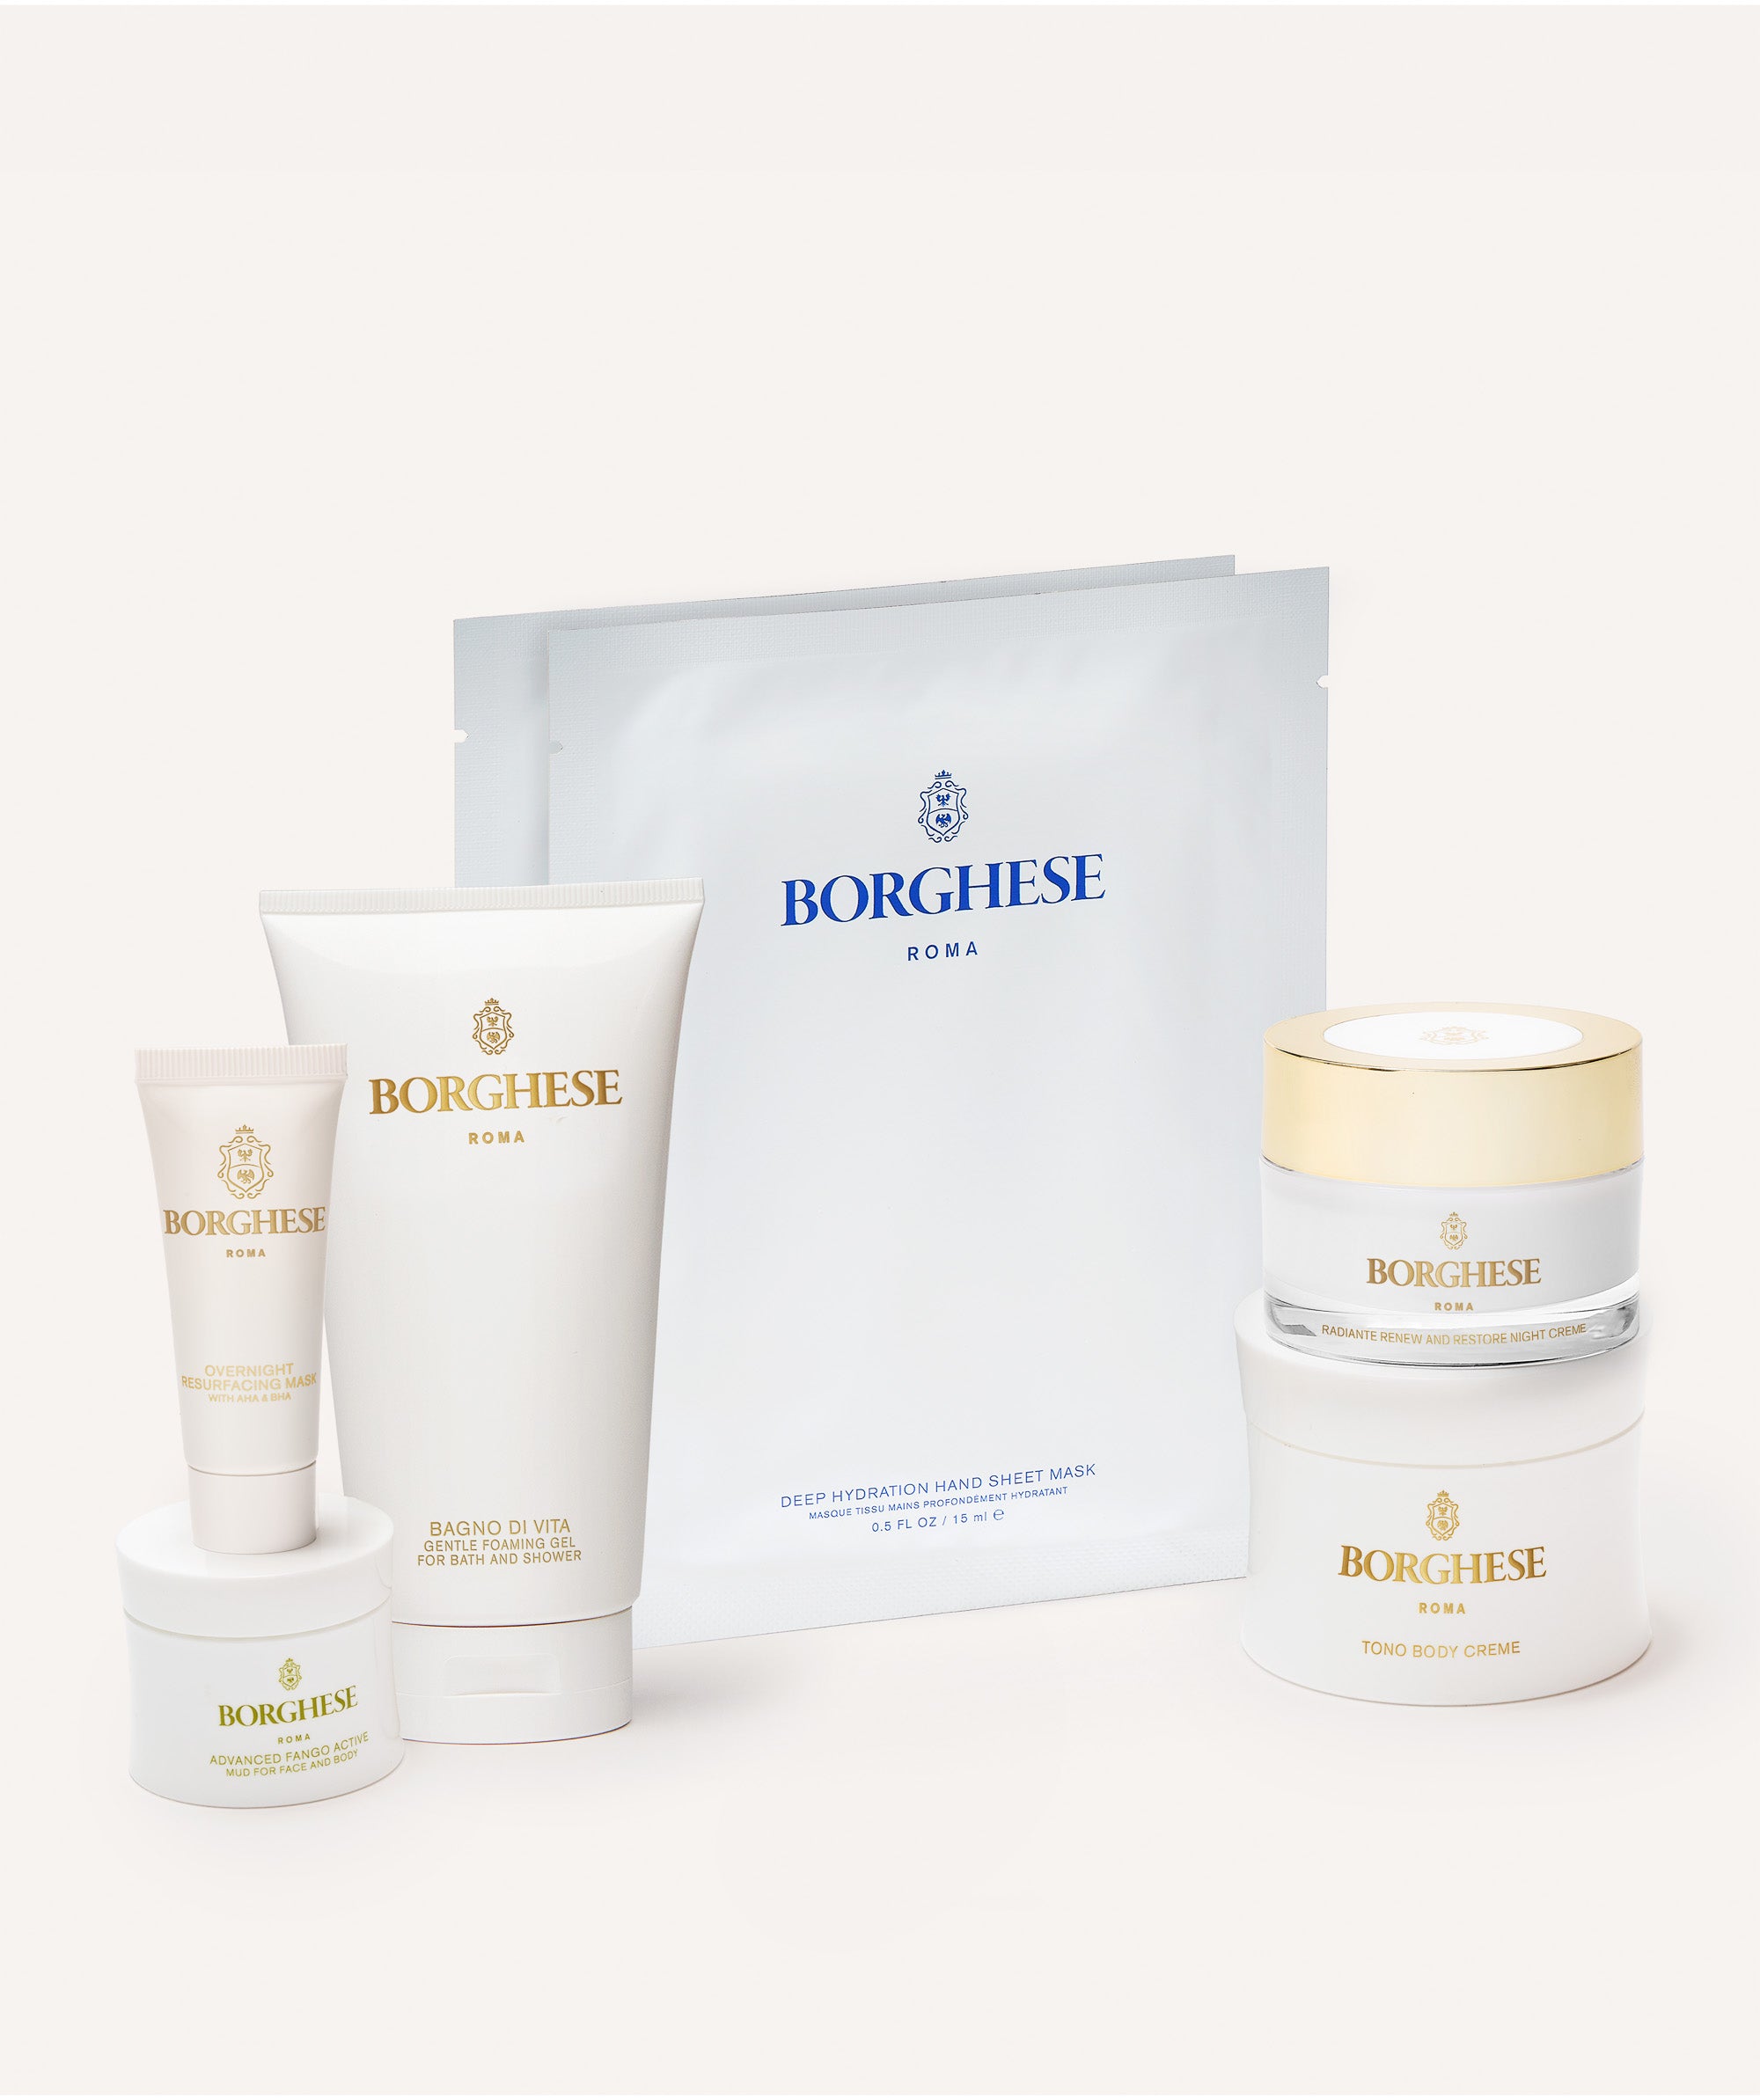 The Borghese Roma 7-Piece Skin Perfecting Gift Set contents